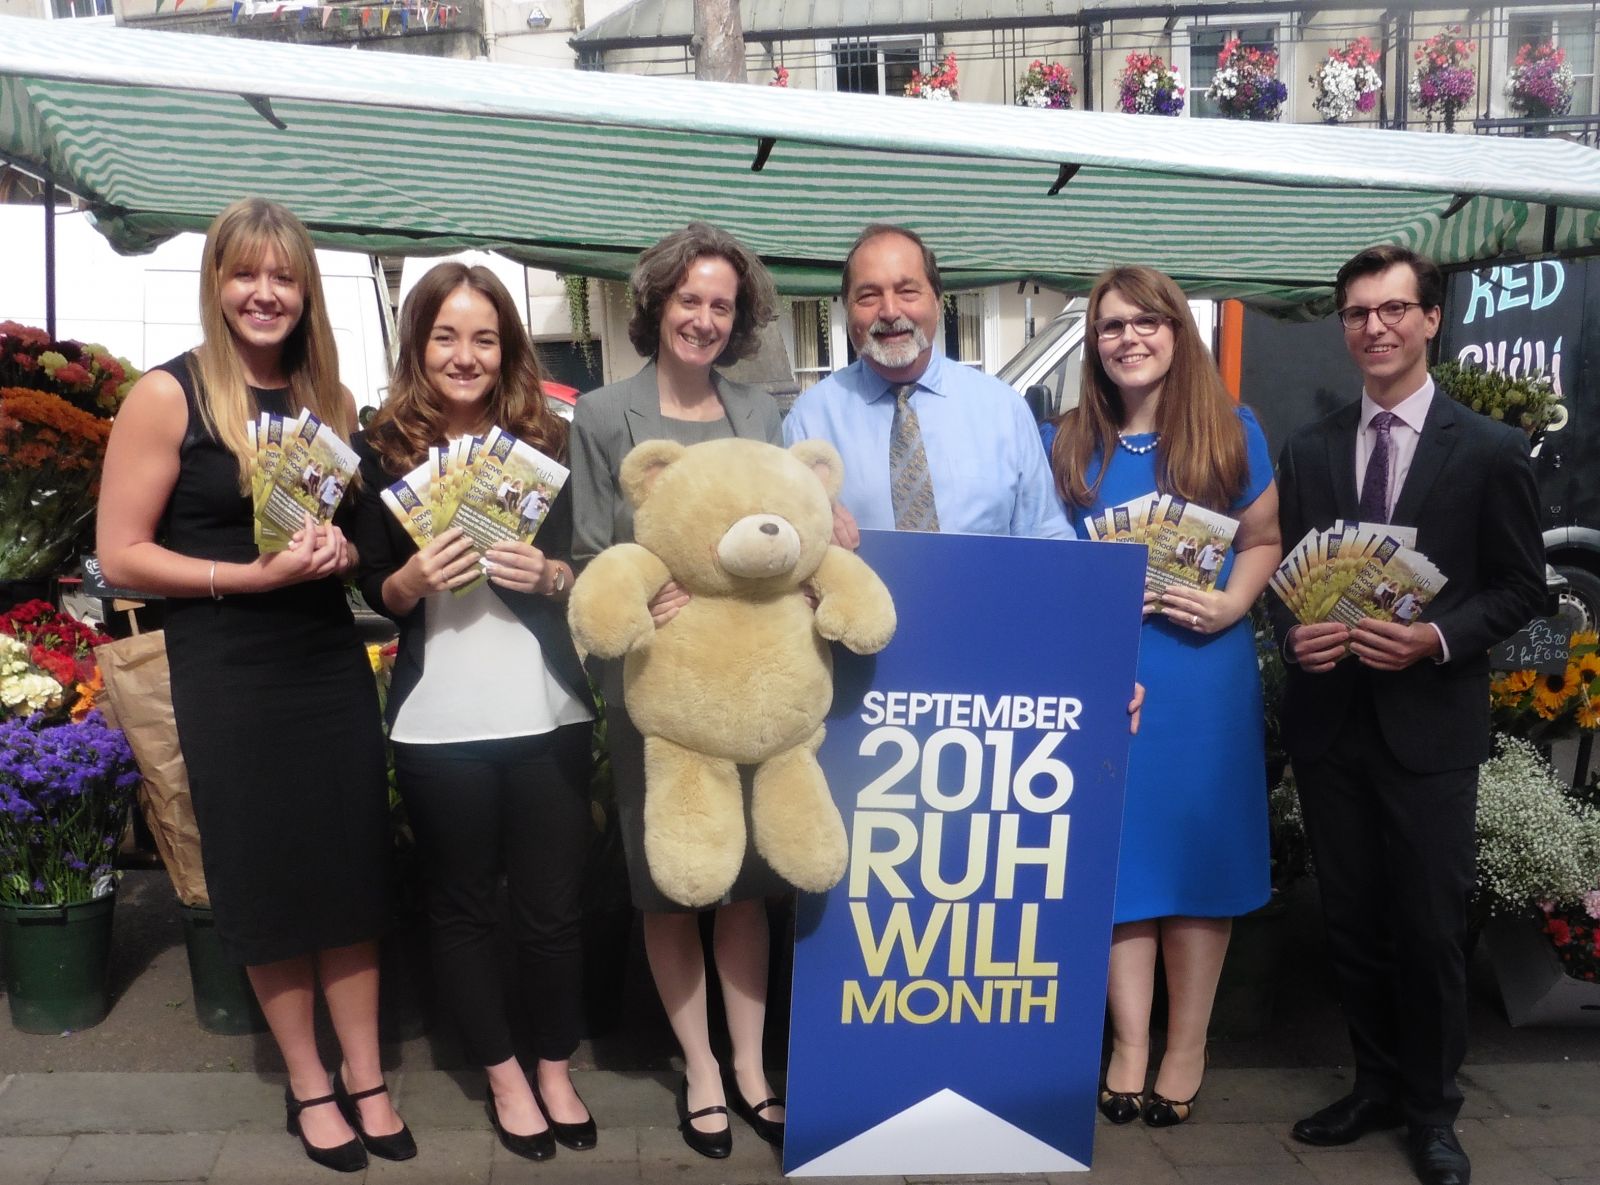 Group of people including Leanna Knight, James Hollis and jane HJealey of FDC Law holding teddy bear and leaflets